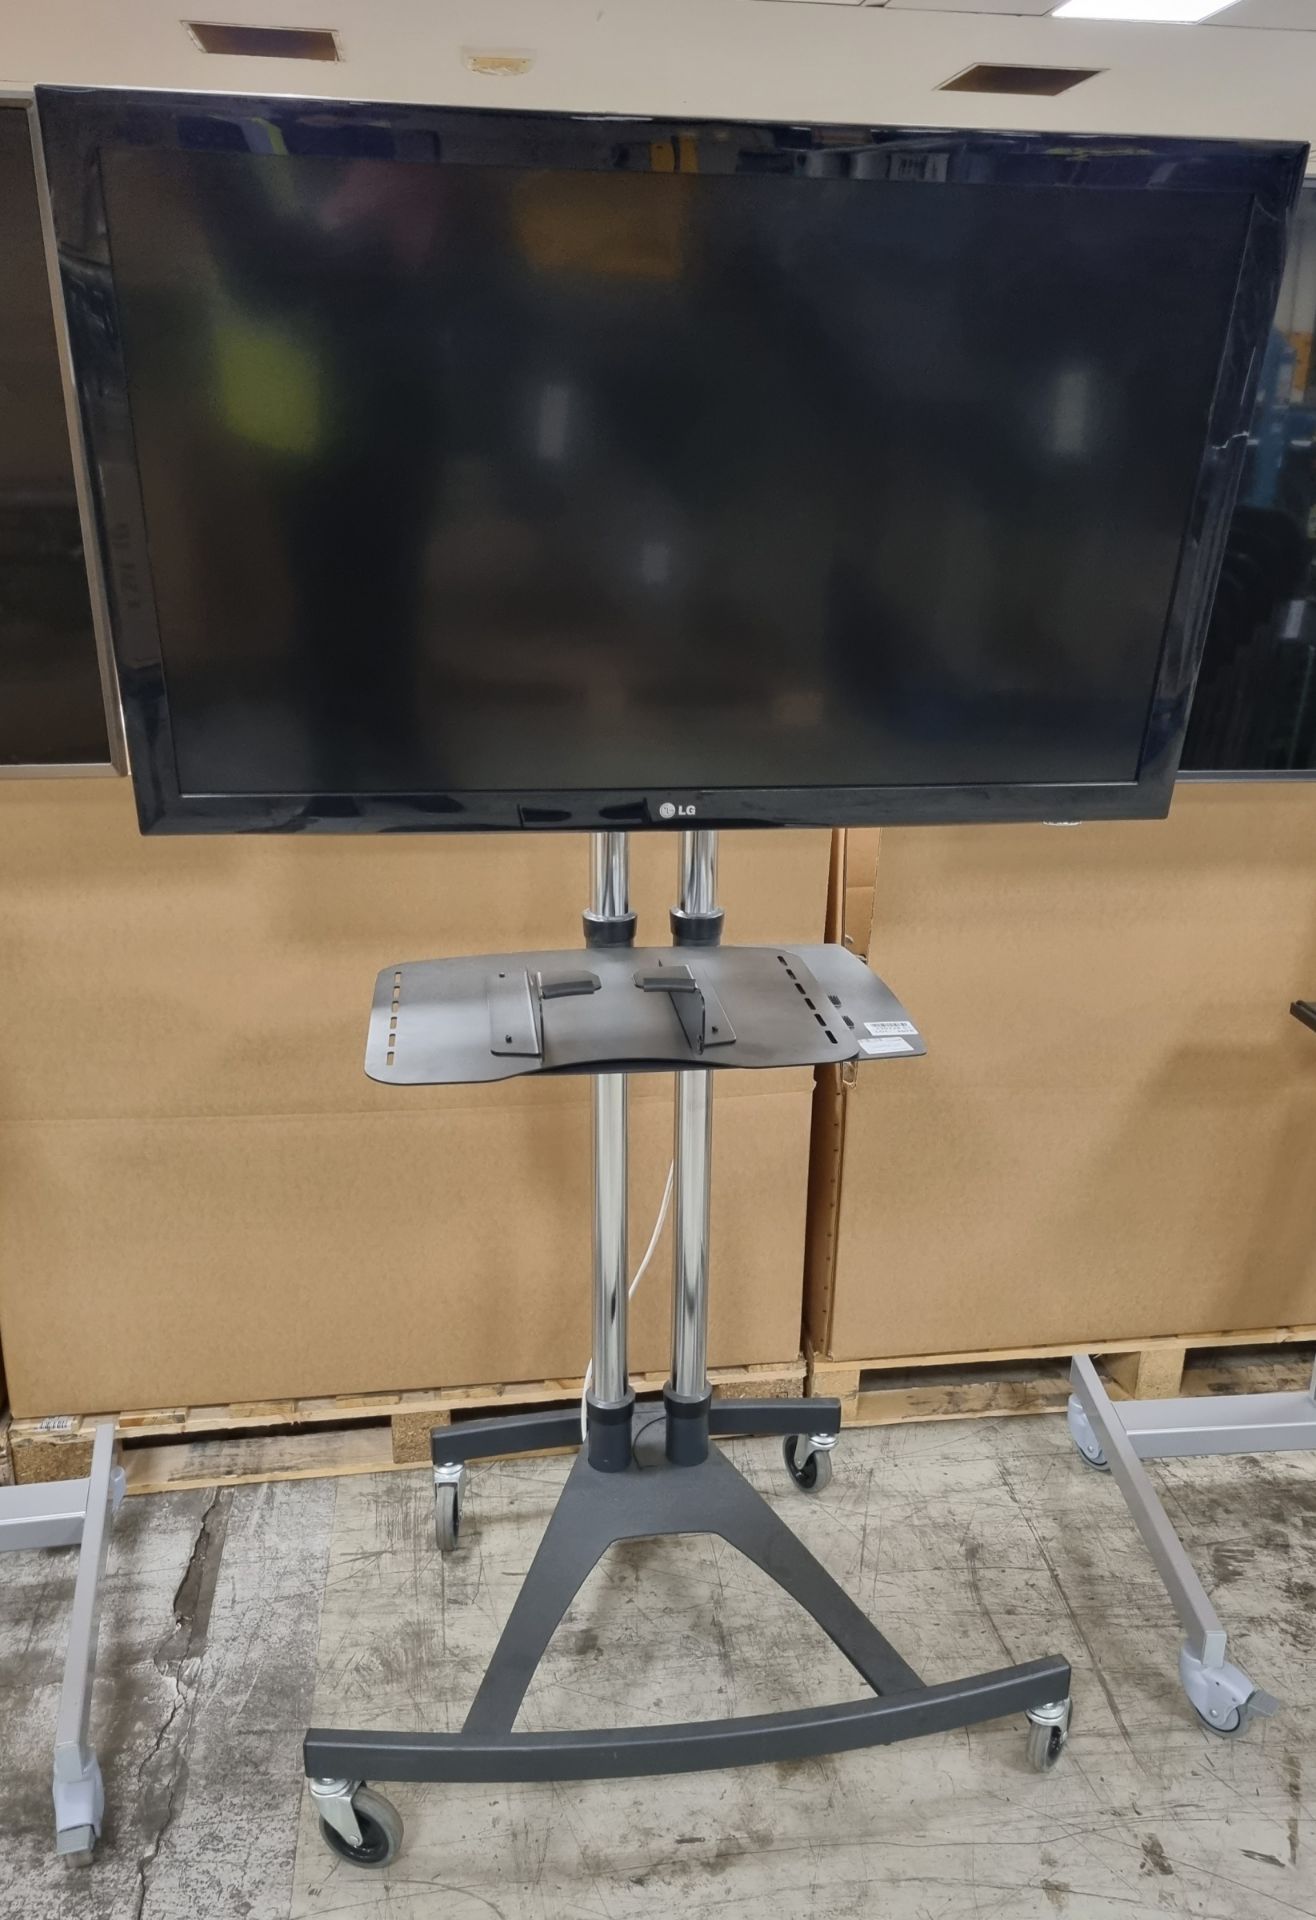 LG 47LD450 47 inch TV on portable trolley stand